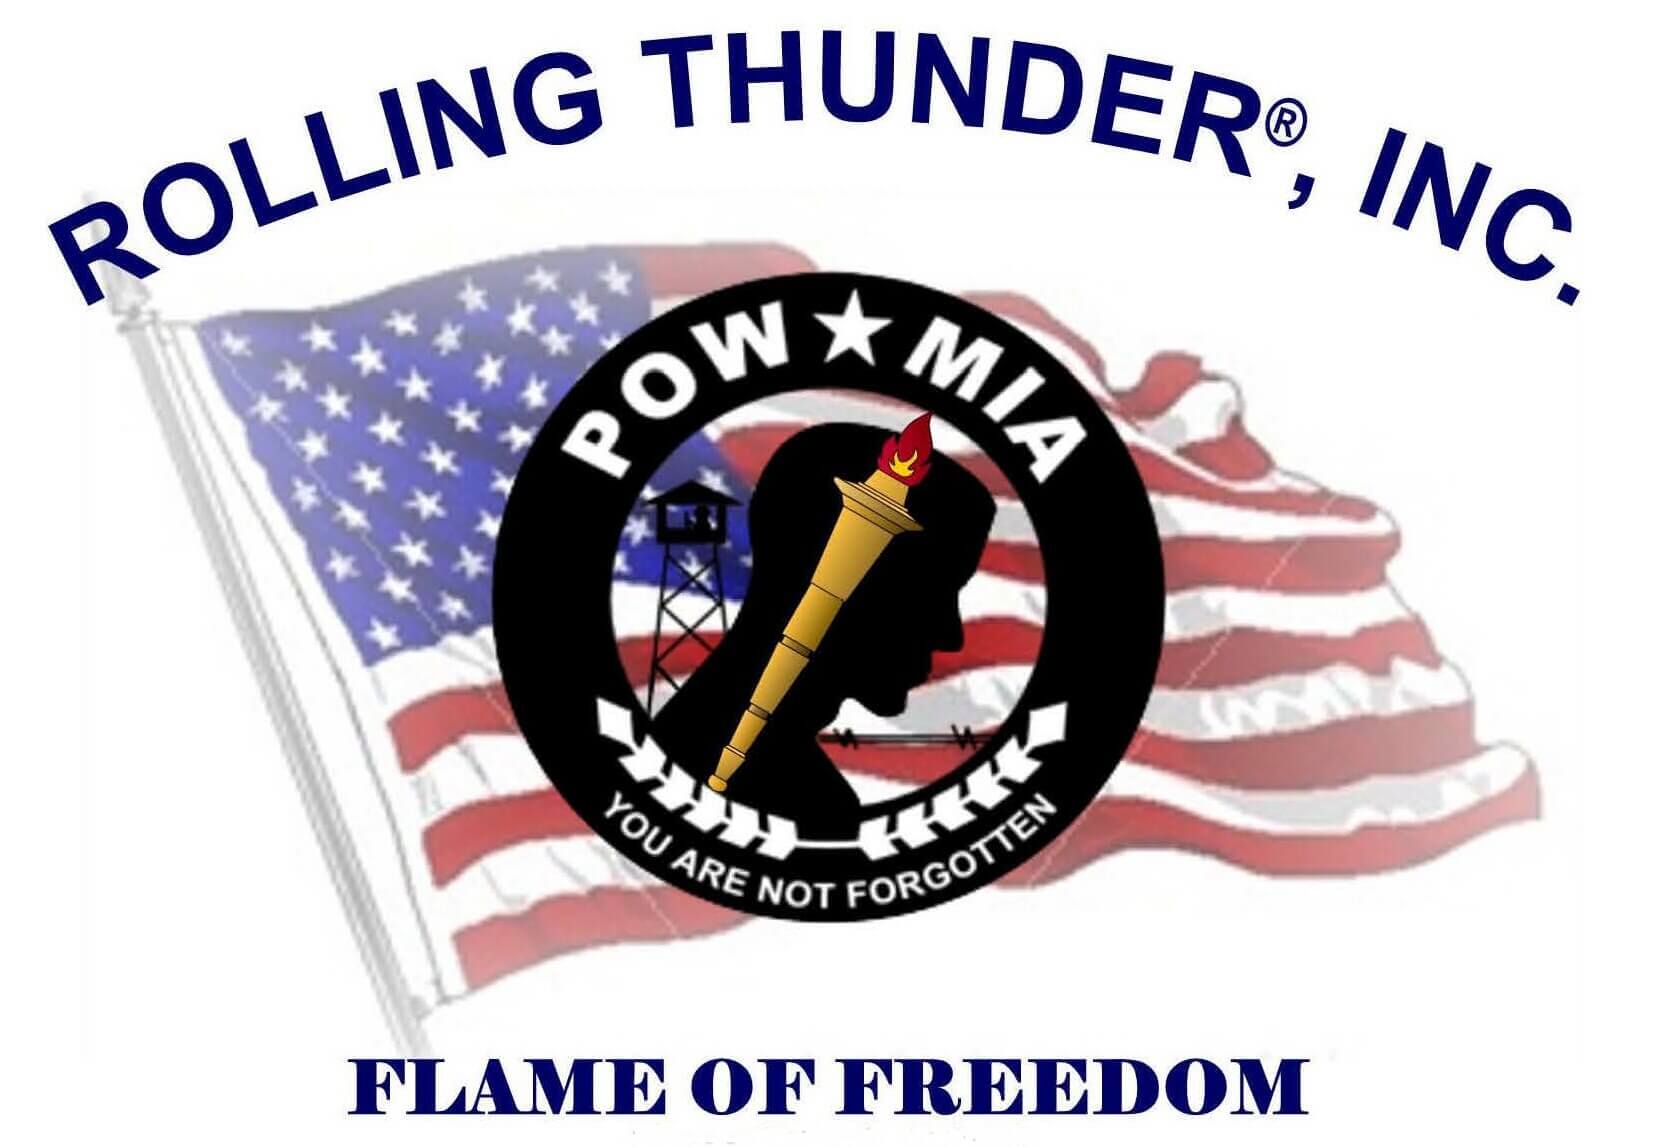 Volvo Participating in Rolling Thunder Freedom Rally